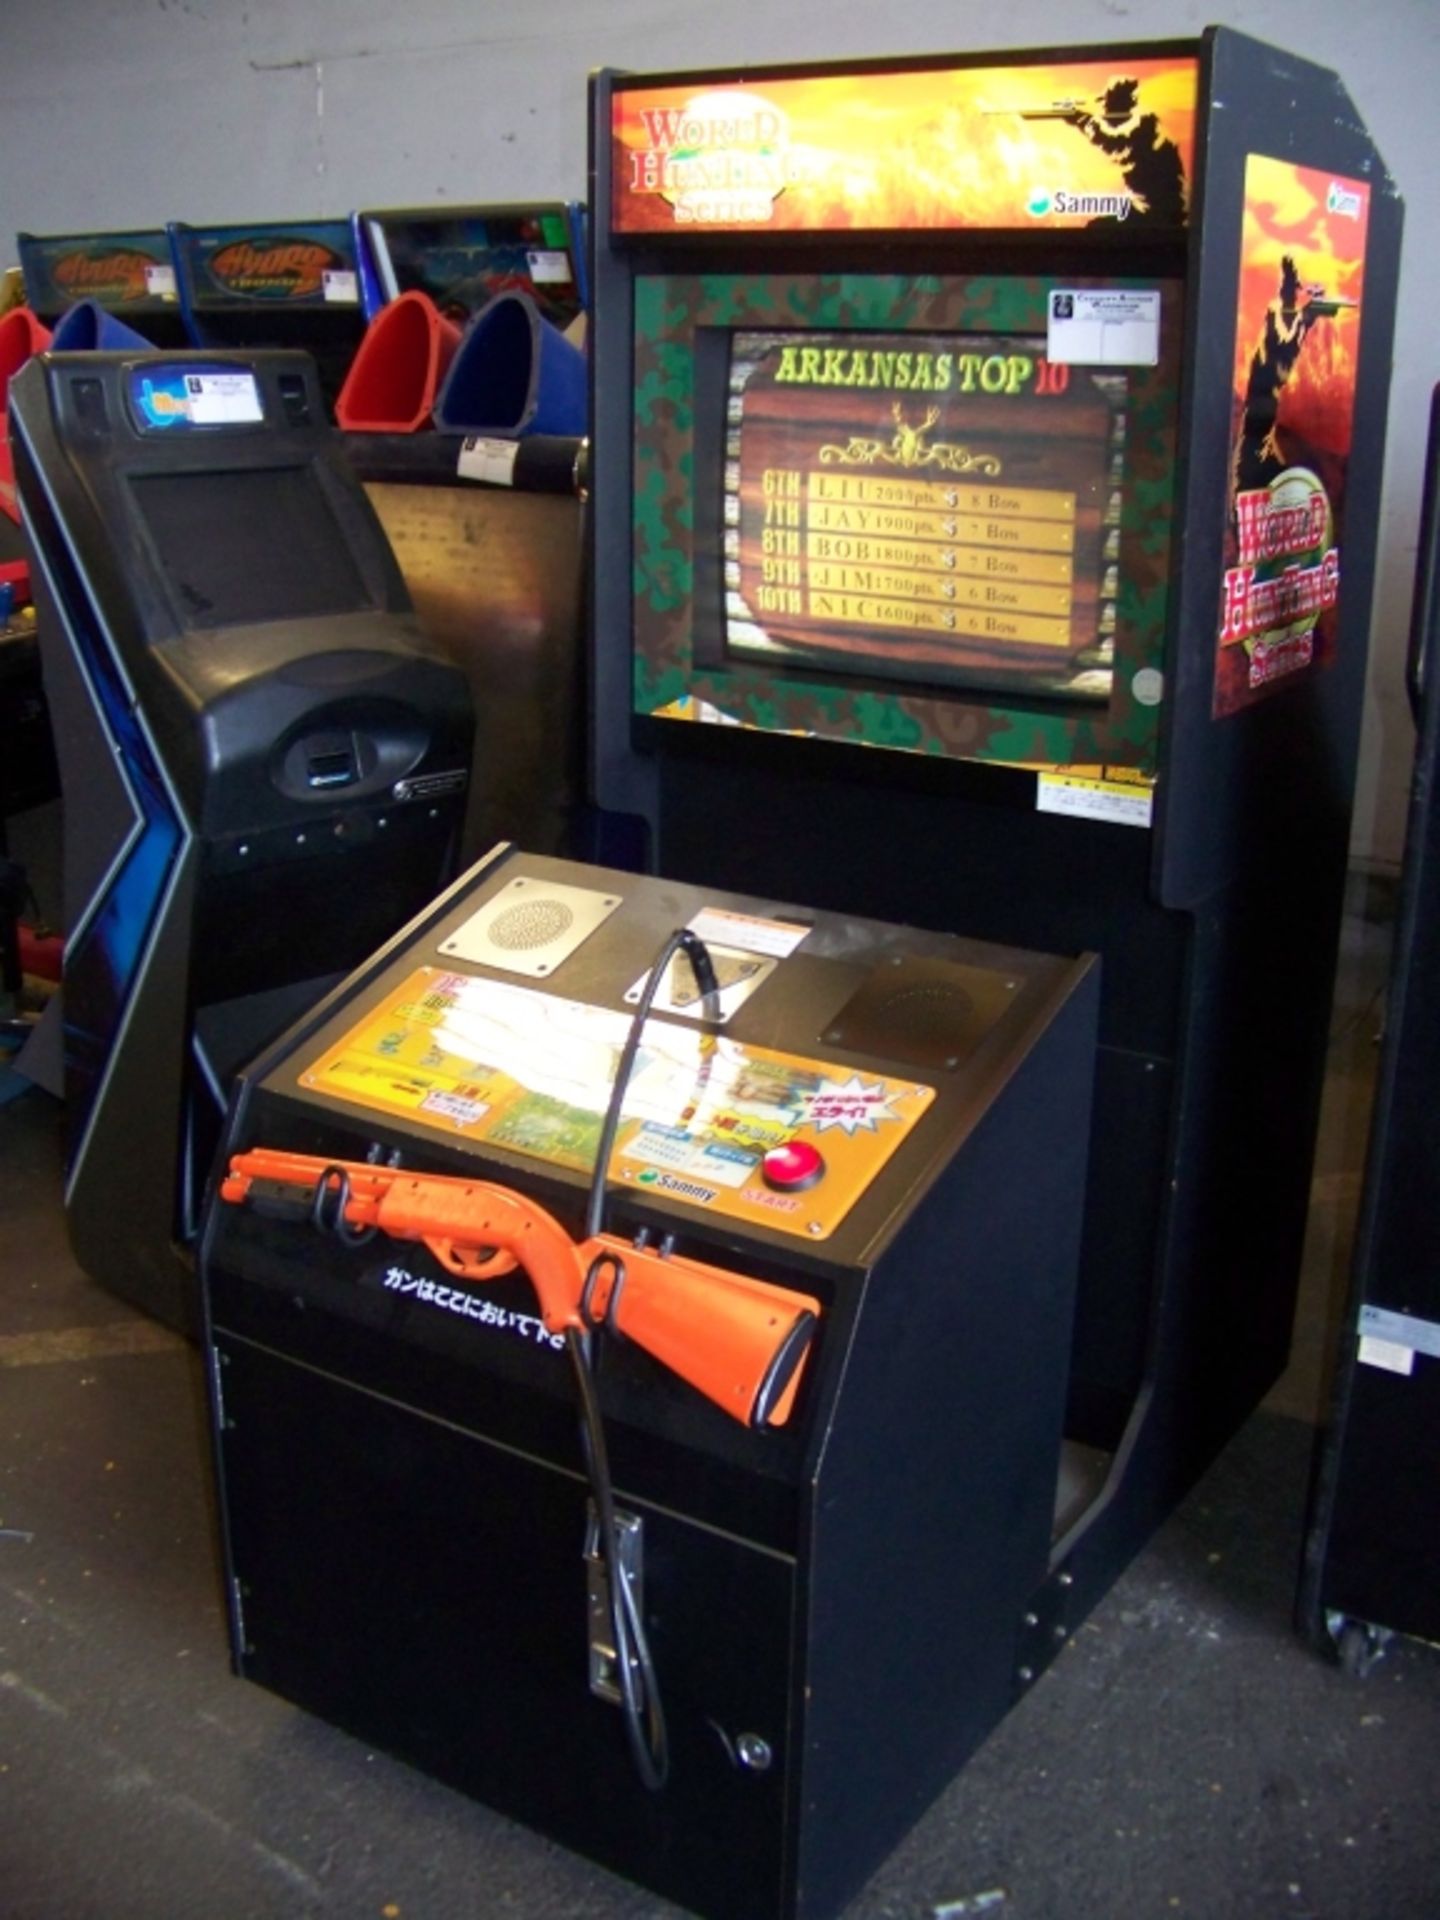 WORLD HUNTING SERIES SHOOTER ARCADE GAME SAMMY JP Item is in used condition. Evidence of wear and